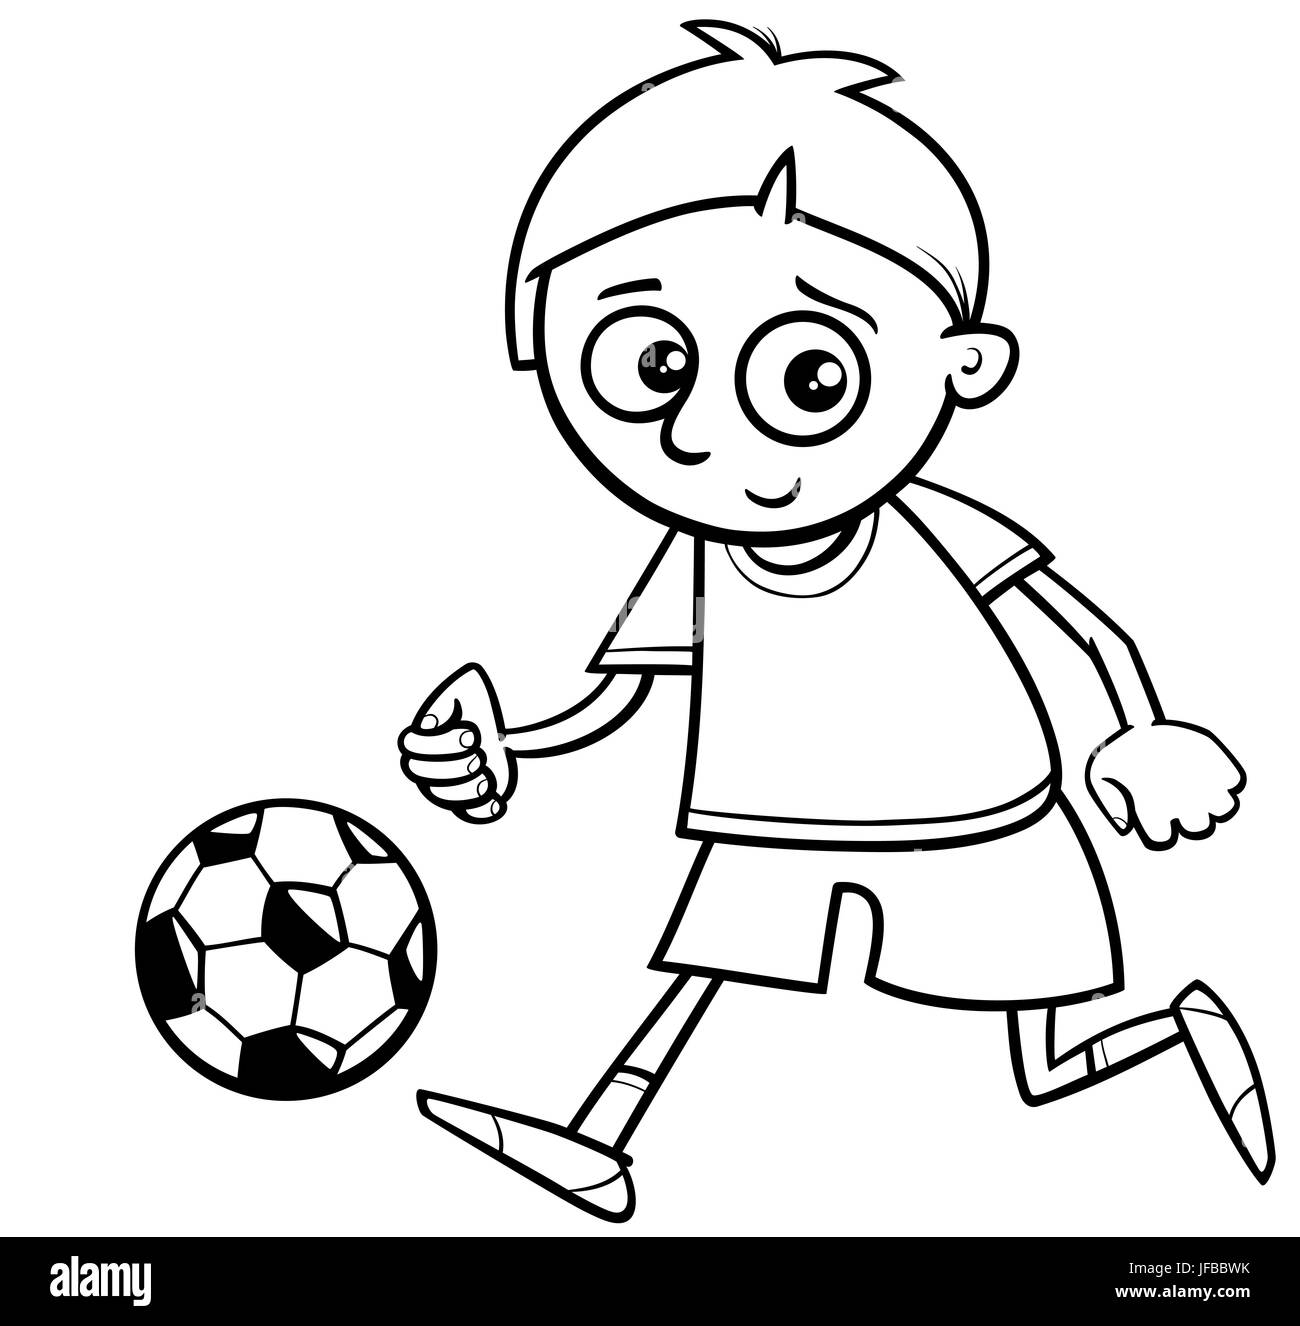 boy playing ball for coloring Stock Photo